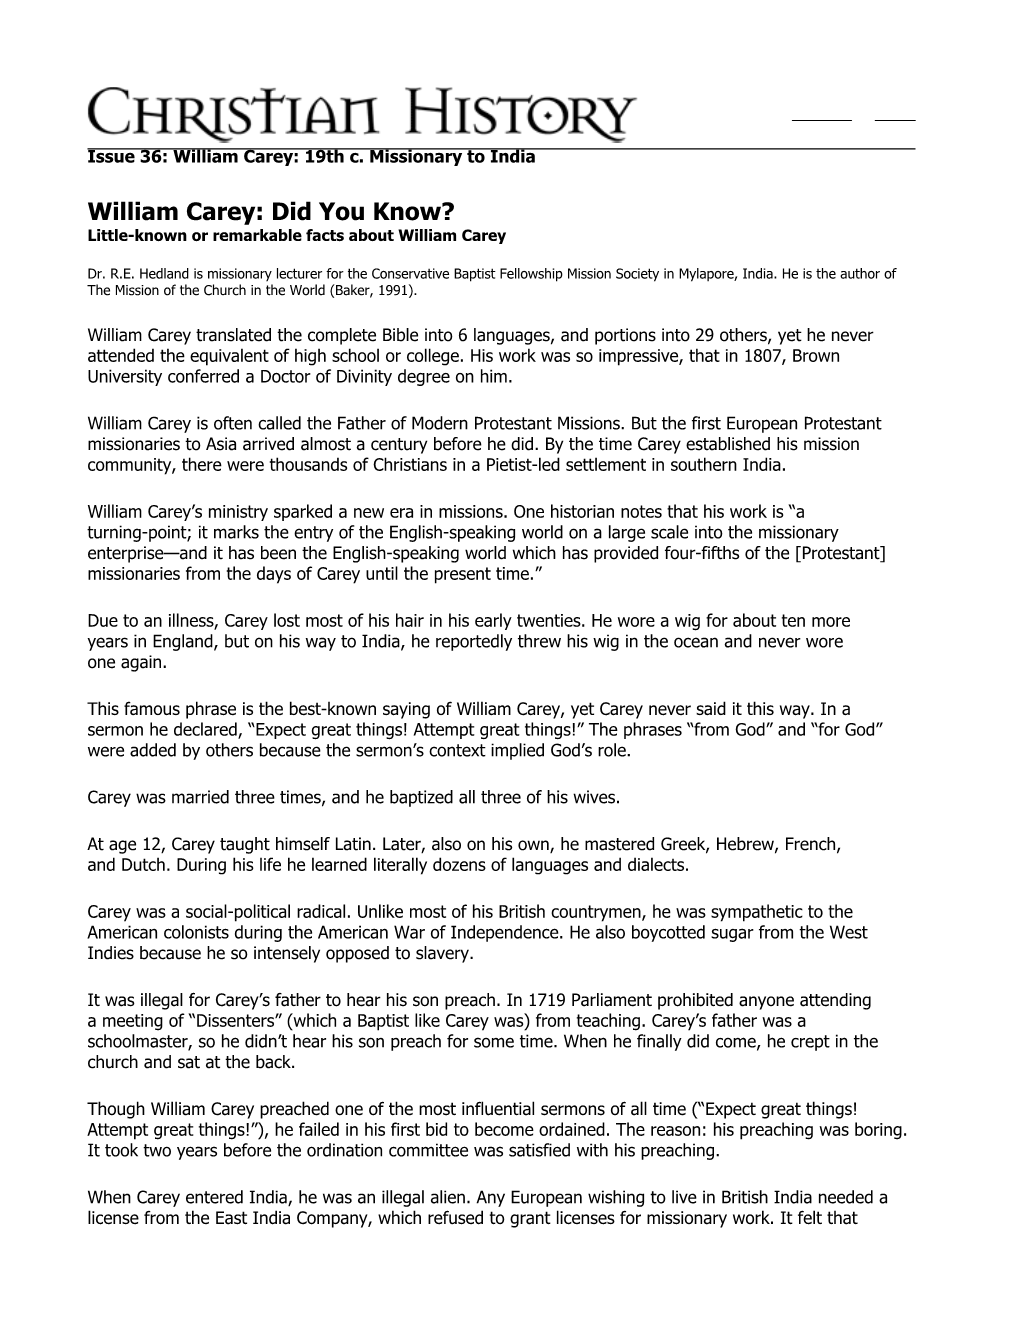 William Carey: Did You Know? Little-Known Or Remarkable Facts About William Carey